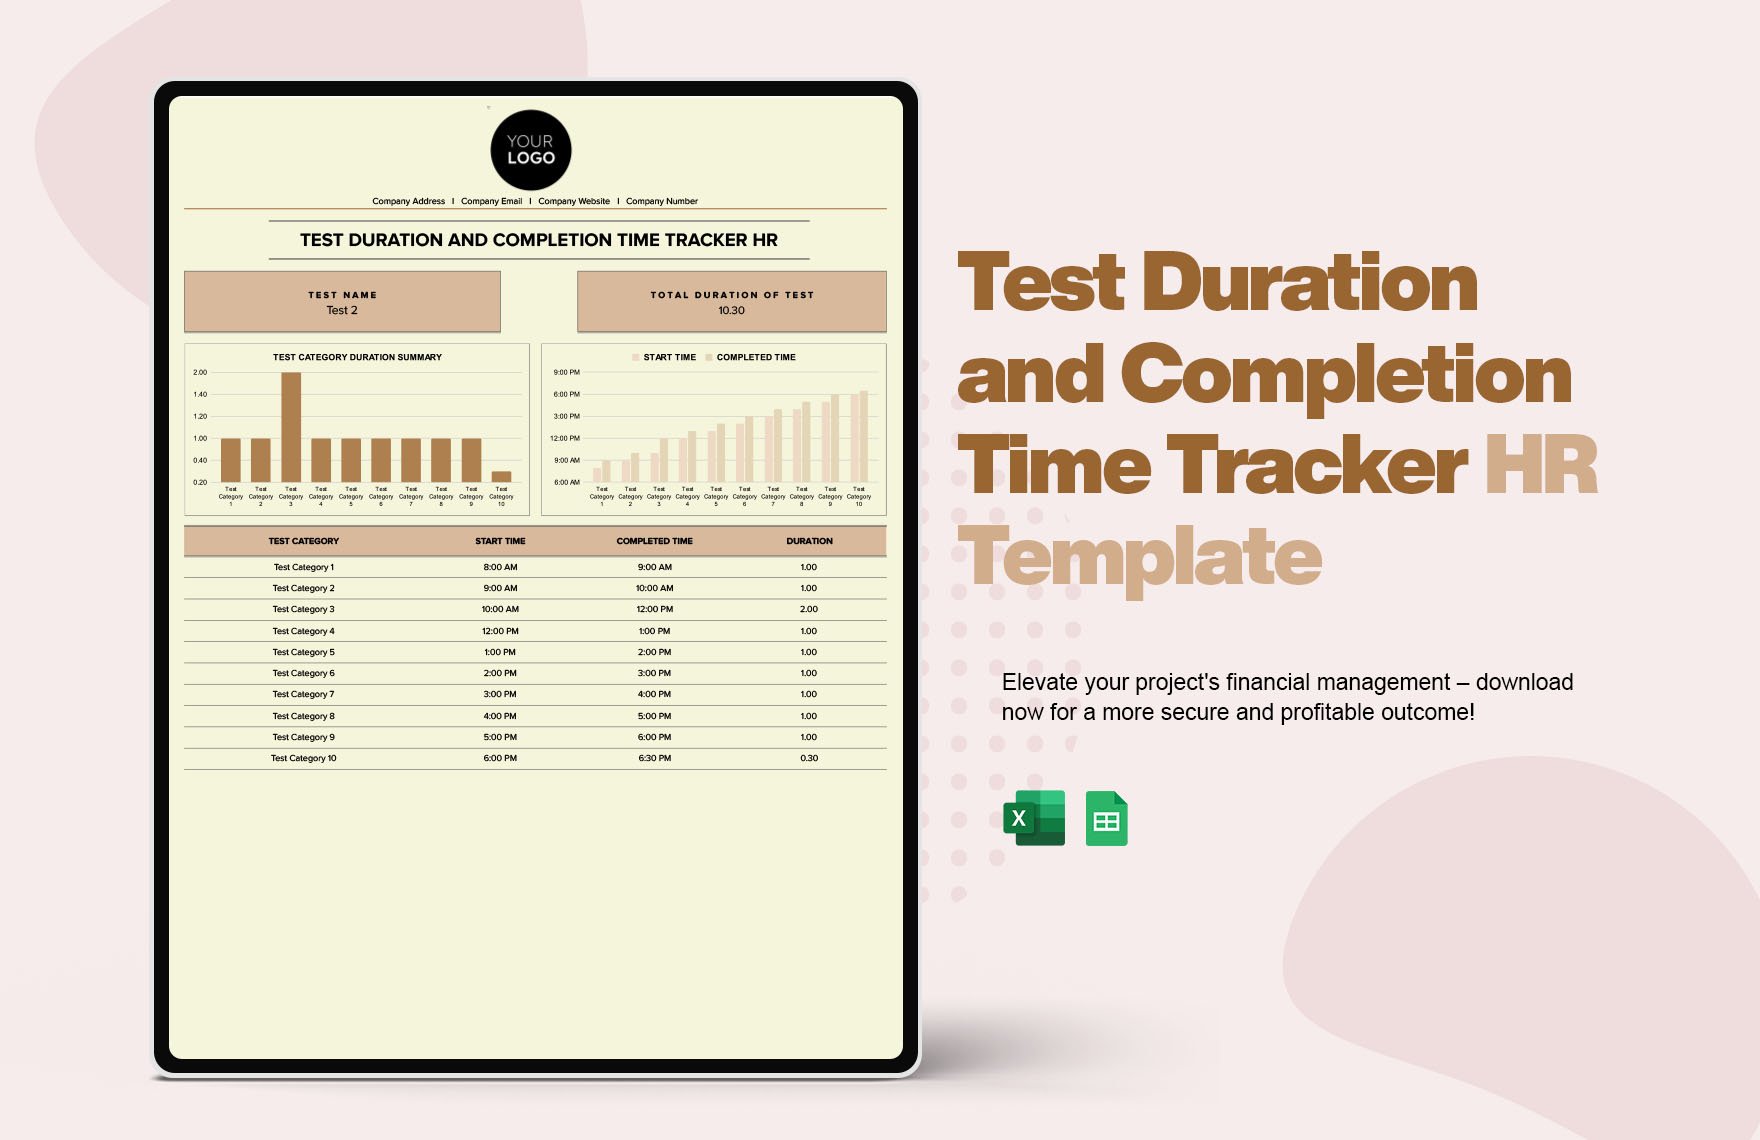 Test Duration and Completion Time Tracker HR Template